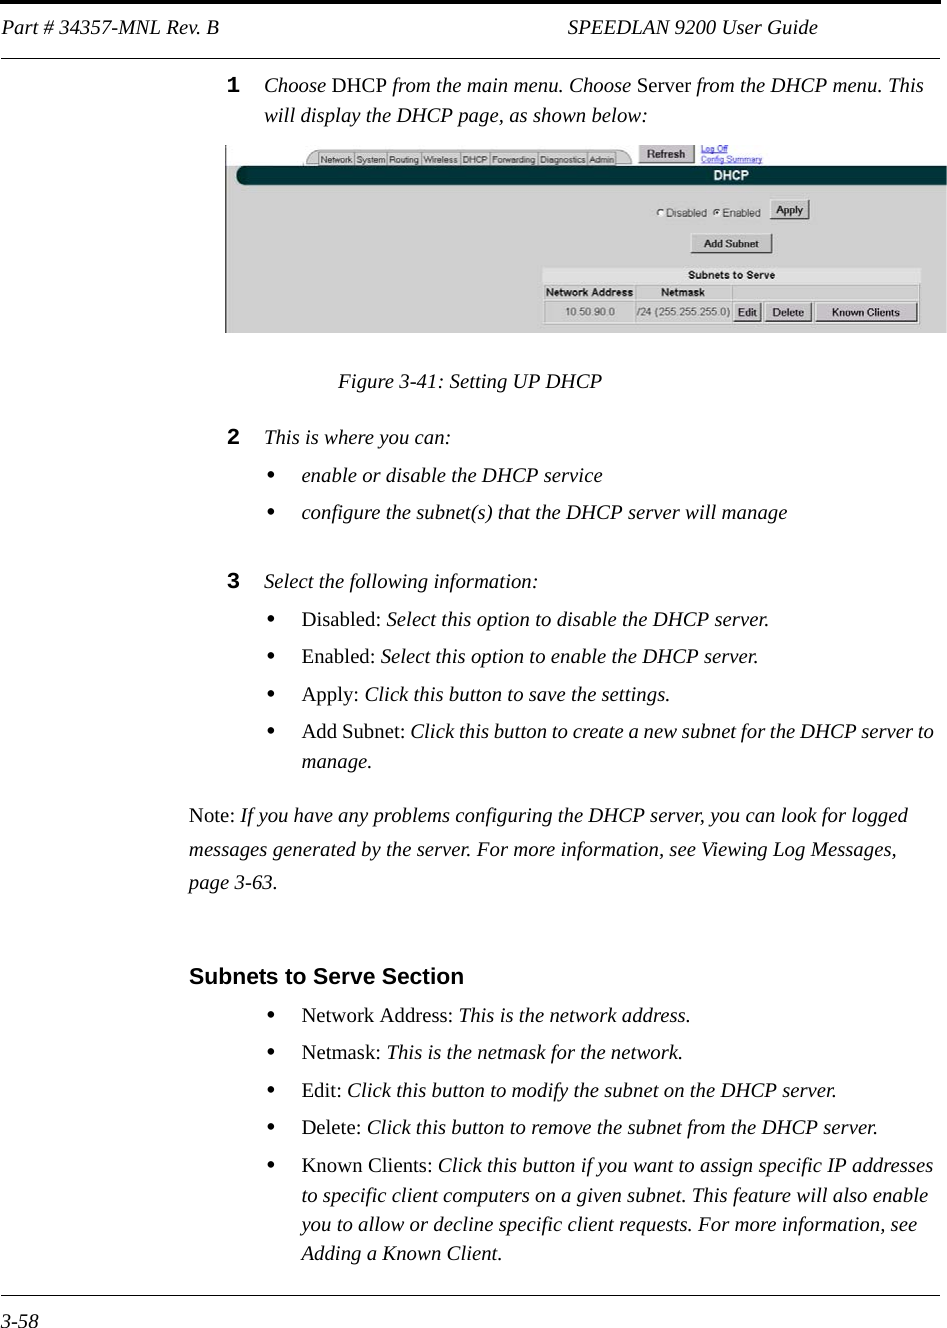 Part # 34357-MNL Rev. B                                                                   SPEEDLAN 9200 User Guide 3-581Choose DHCP from the main menu. Choose Server from the DHCP menu. This will display the DHCP page, as shown below:Figure 3-41: Setting UP DHCP2This is where you can: •enable or disable the DHCP service•configure the subnet(s) that the DHCP server will manage3Select the following information: •Disabled: Select this option to disable the DHCP server.•Enabled: Select this option to enable the DHCP server.•Apply: Click this button to save the settings. •Add Subnet: Click this button to create a new subnet for the DHCP server to manage. Note: If you have any problems configuring the DHCP server, you can look for logged messages generated by the server. For more information, see Viewing Log Messages, page 3-63.Subnets to Serve Section•Network Address: This is the network address.•Netmask: This is the netmask for the network.•Edit: Click this button to modify the subnet on the DHCP server.•Delete: Click this button to remove the subnet from the DHCP server. •Known Clients: Click this button if you want to assign specific IP addresses to specific client computers on a given subnet. This feature will also enable you to allow or decline specific client requests. For more information, see Adding a Known Client.